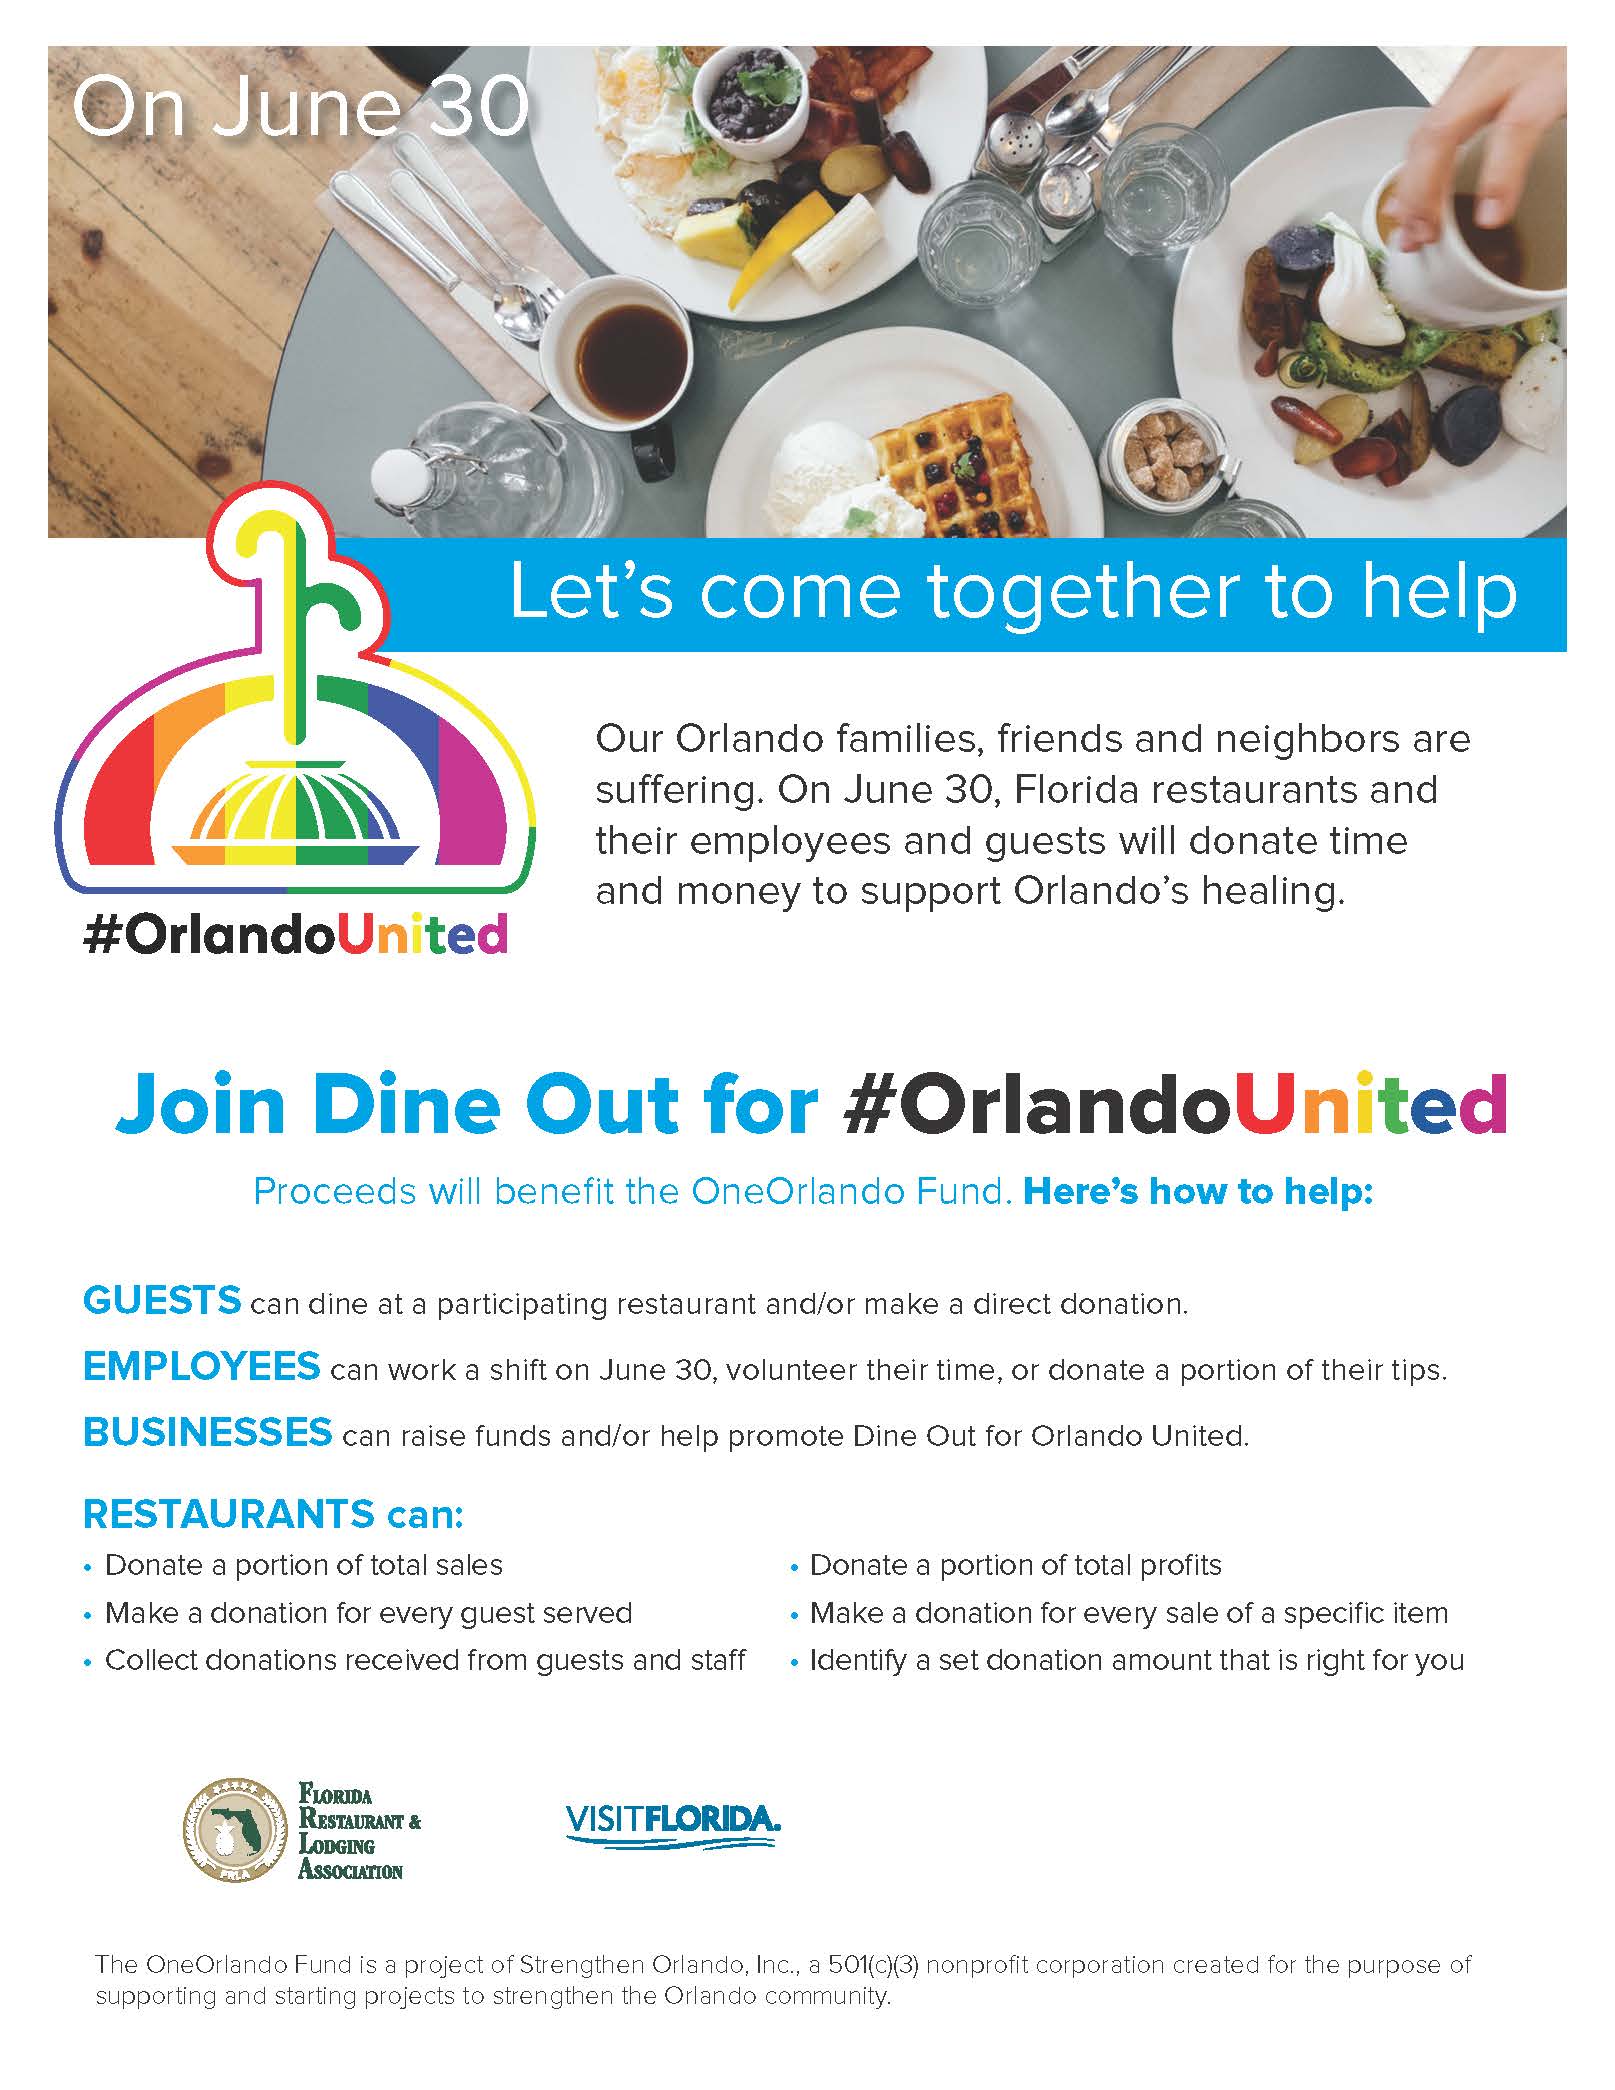 Dine Out for Orlando United to Support Victims, Families and Community on June 30th